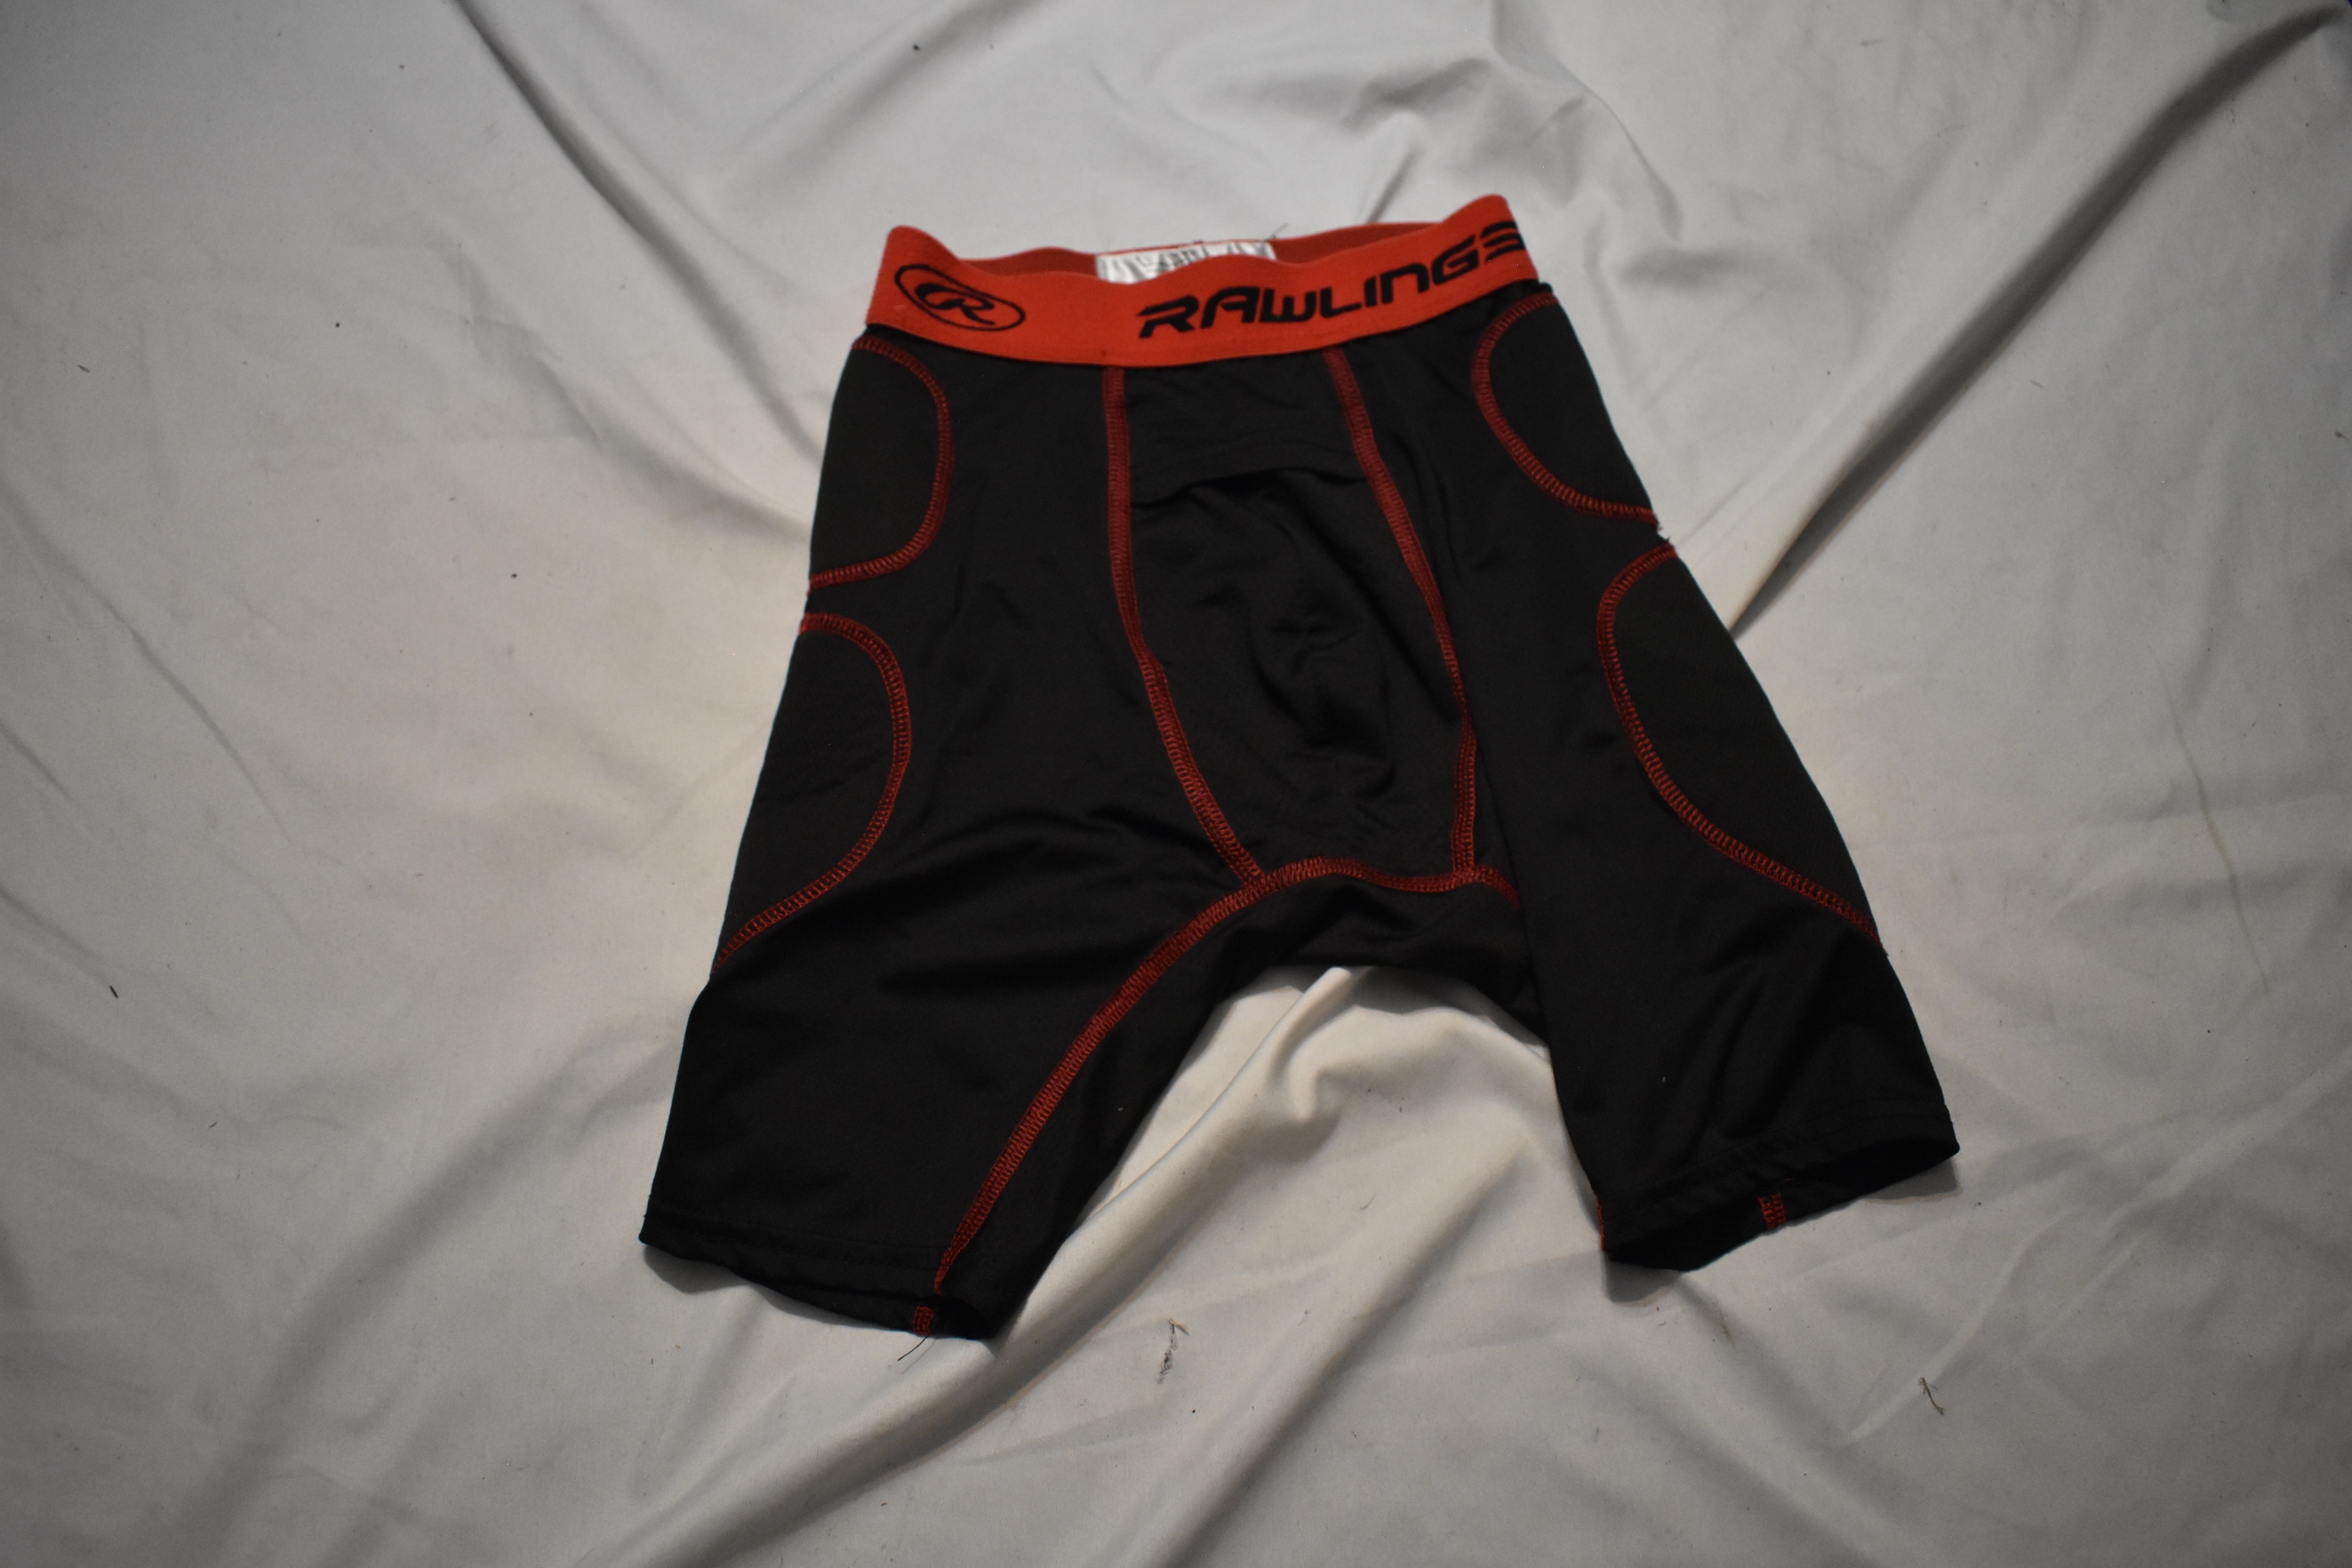 Youth Padded Sliding Short G3 w/Cup